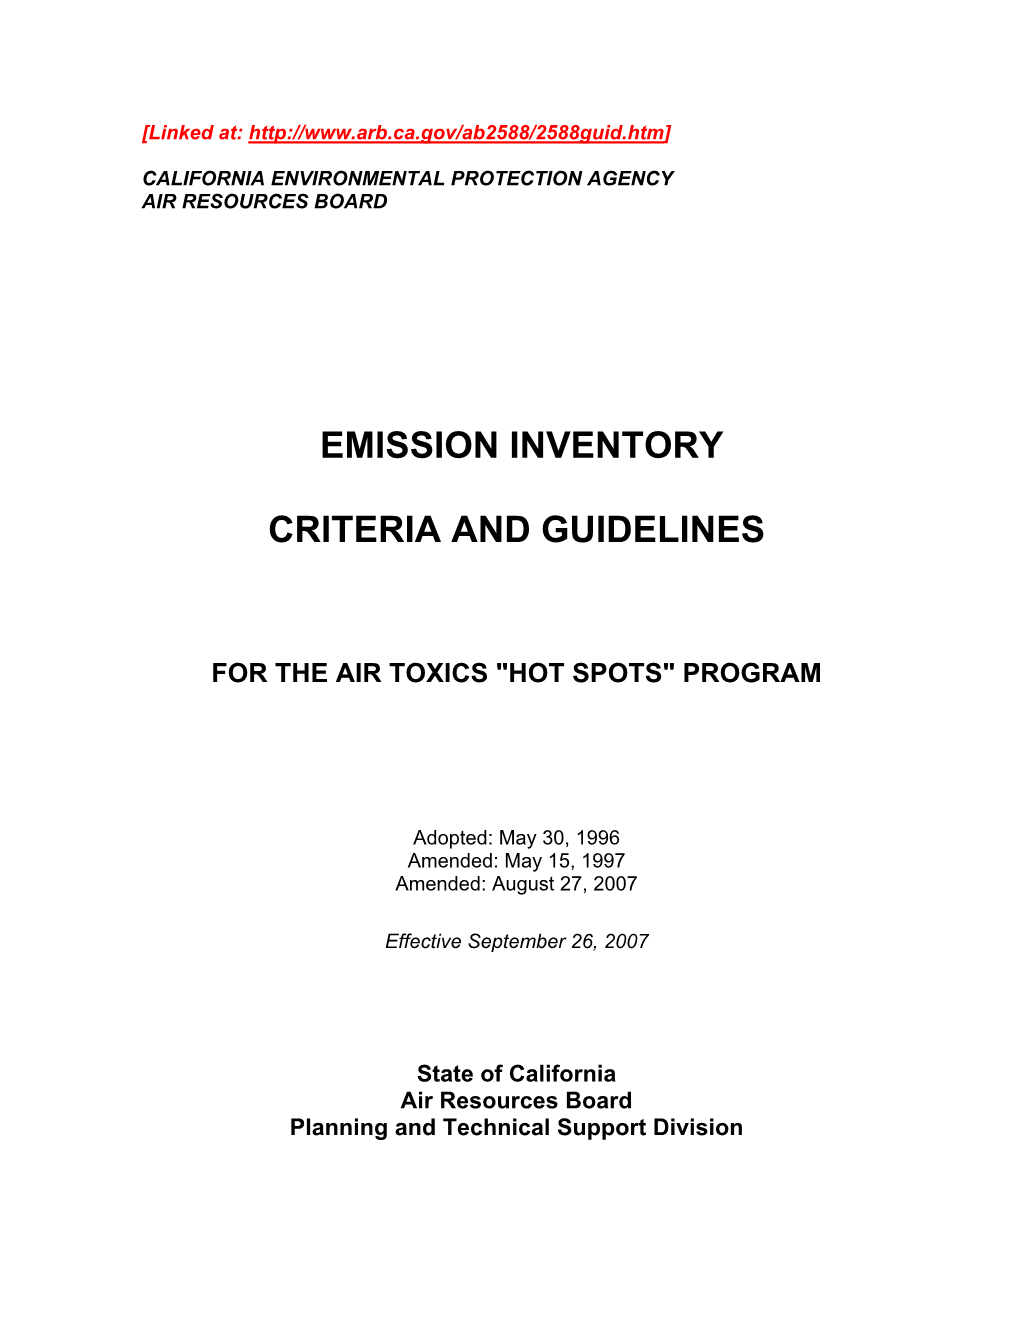 Emission Inventory Criteria and Guidelines Report